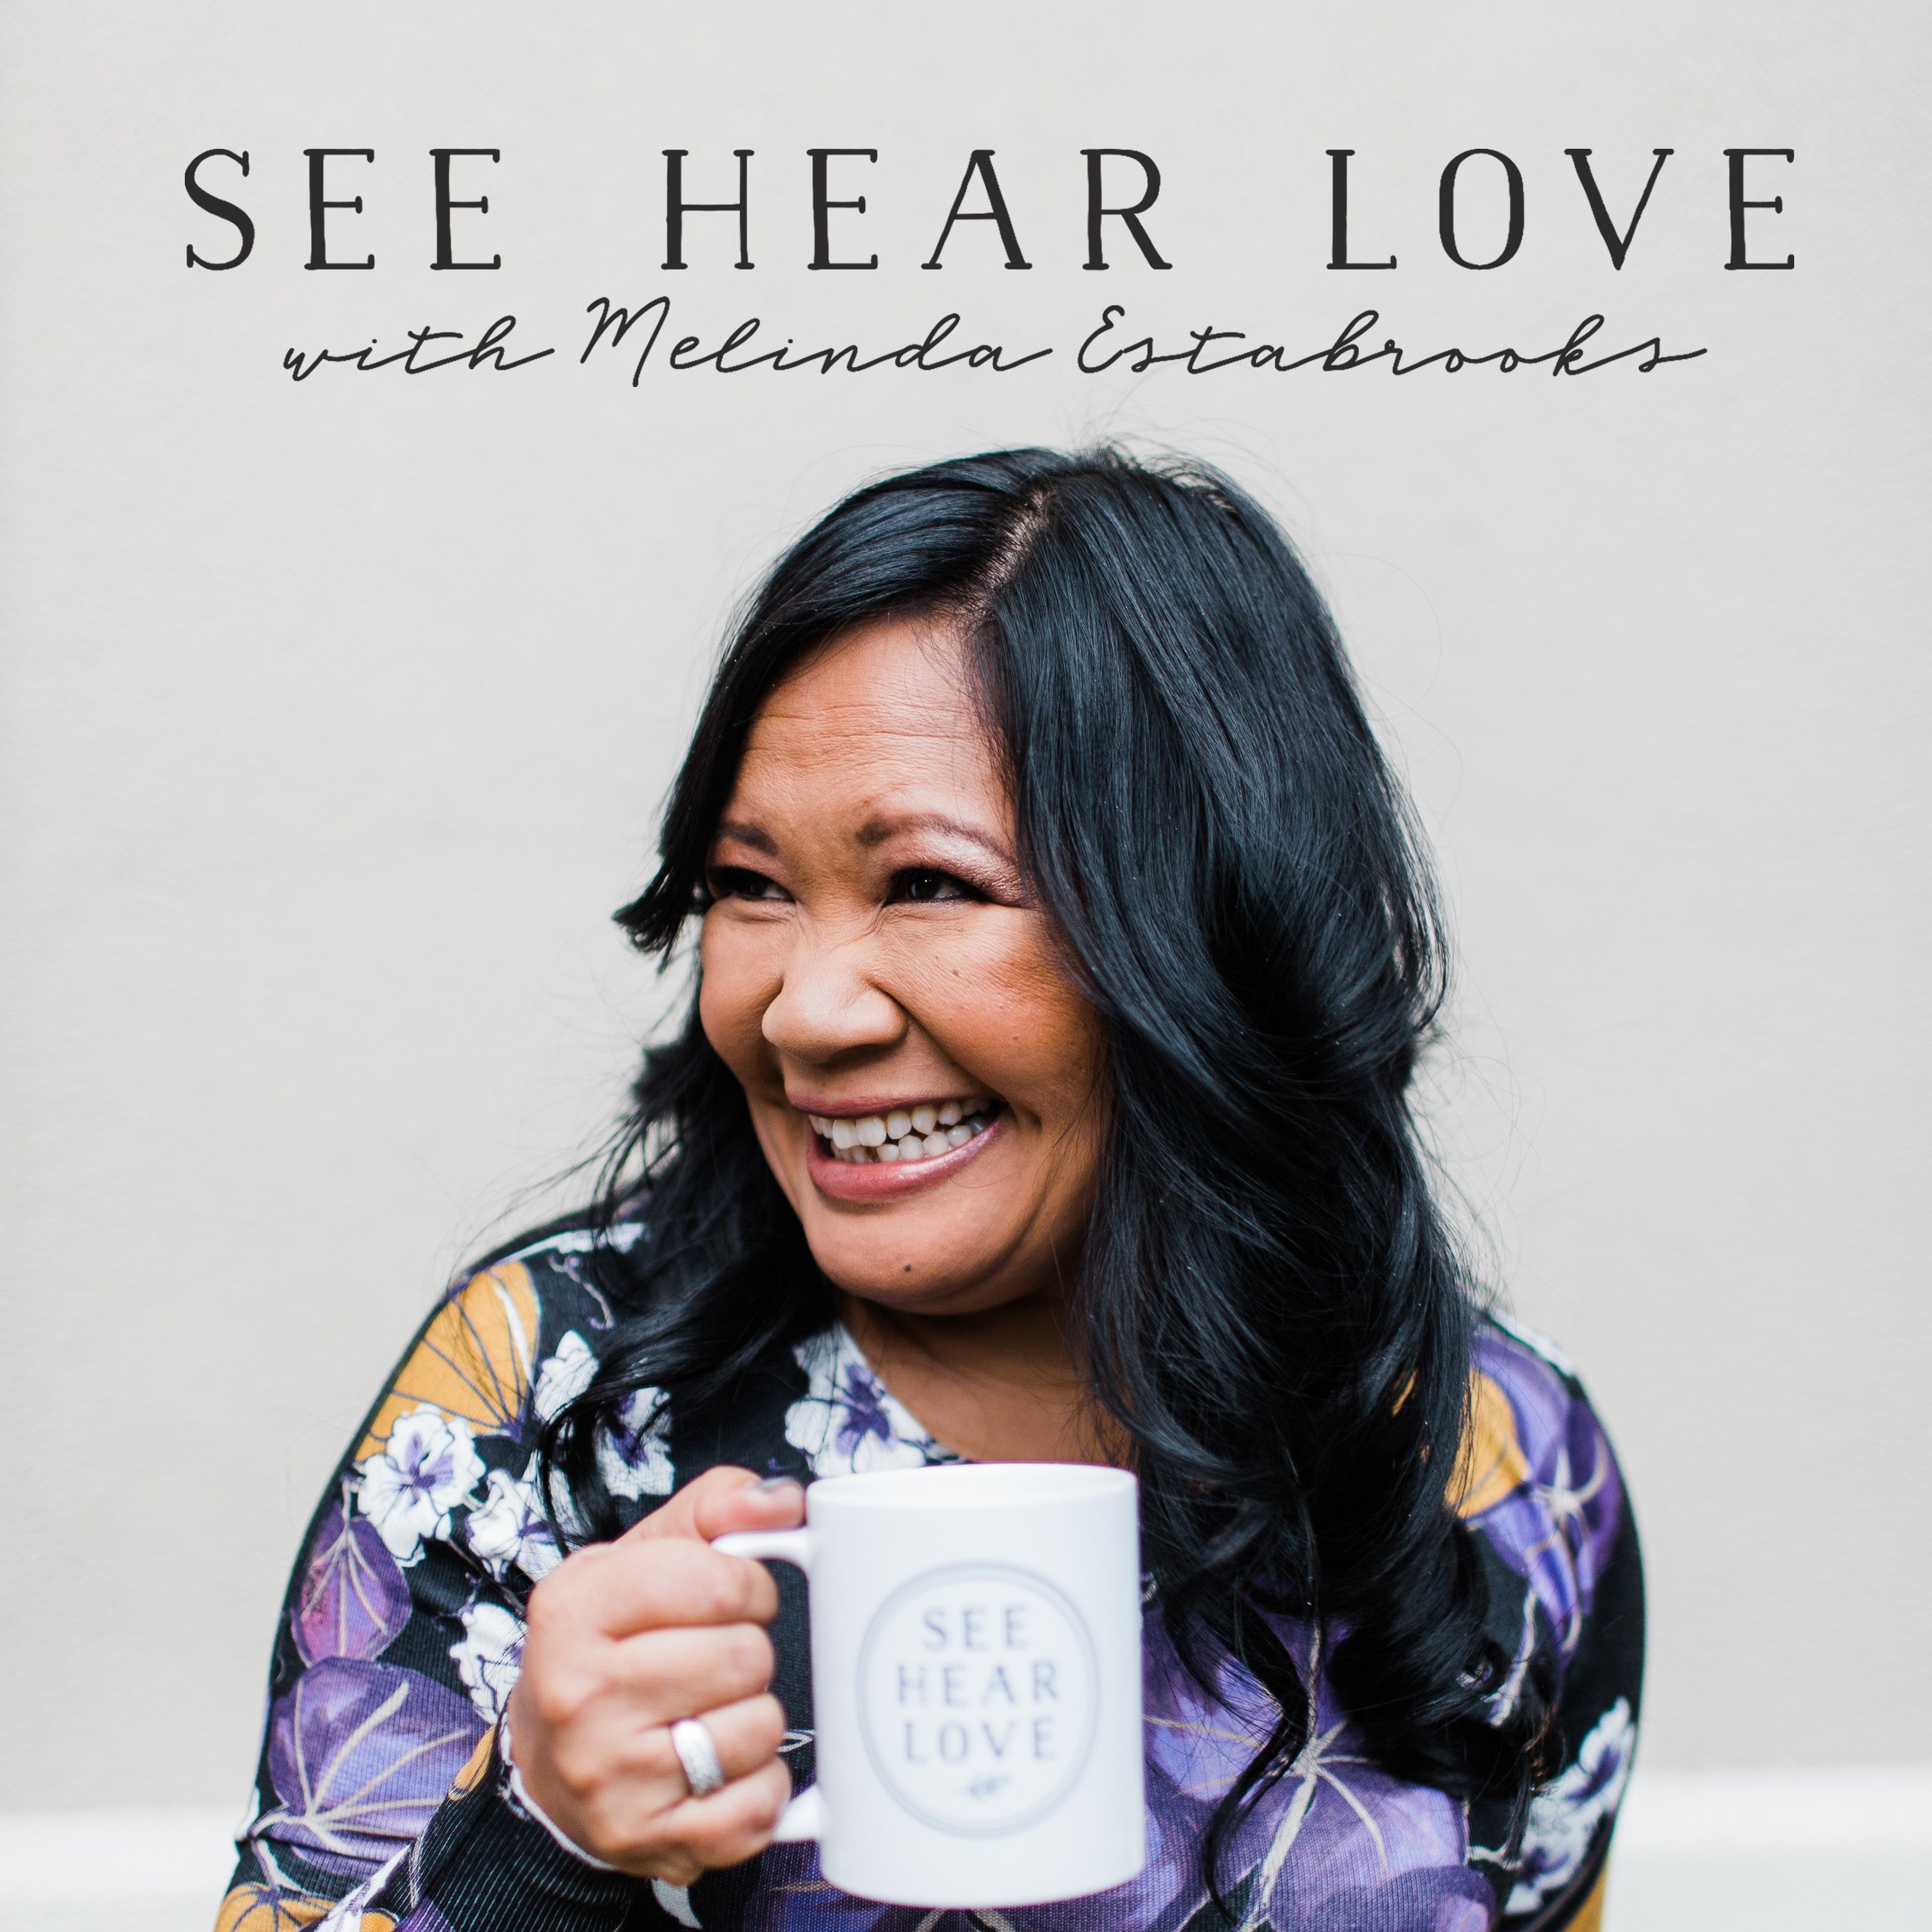 What It's Really Like to Host See Hear Love...